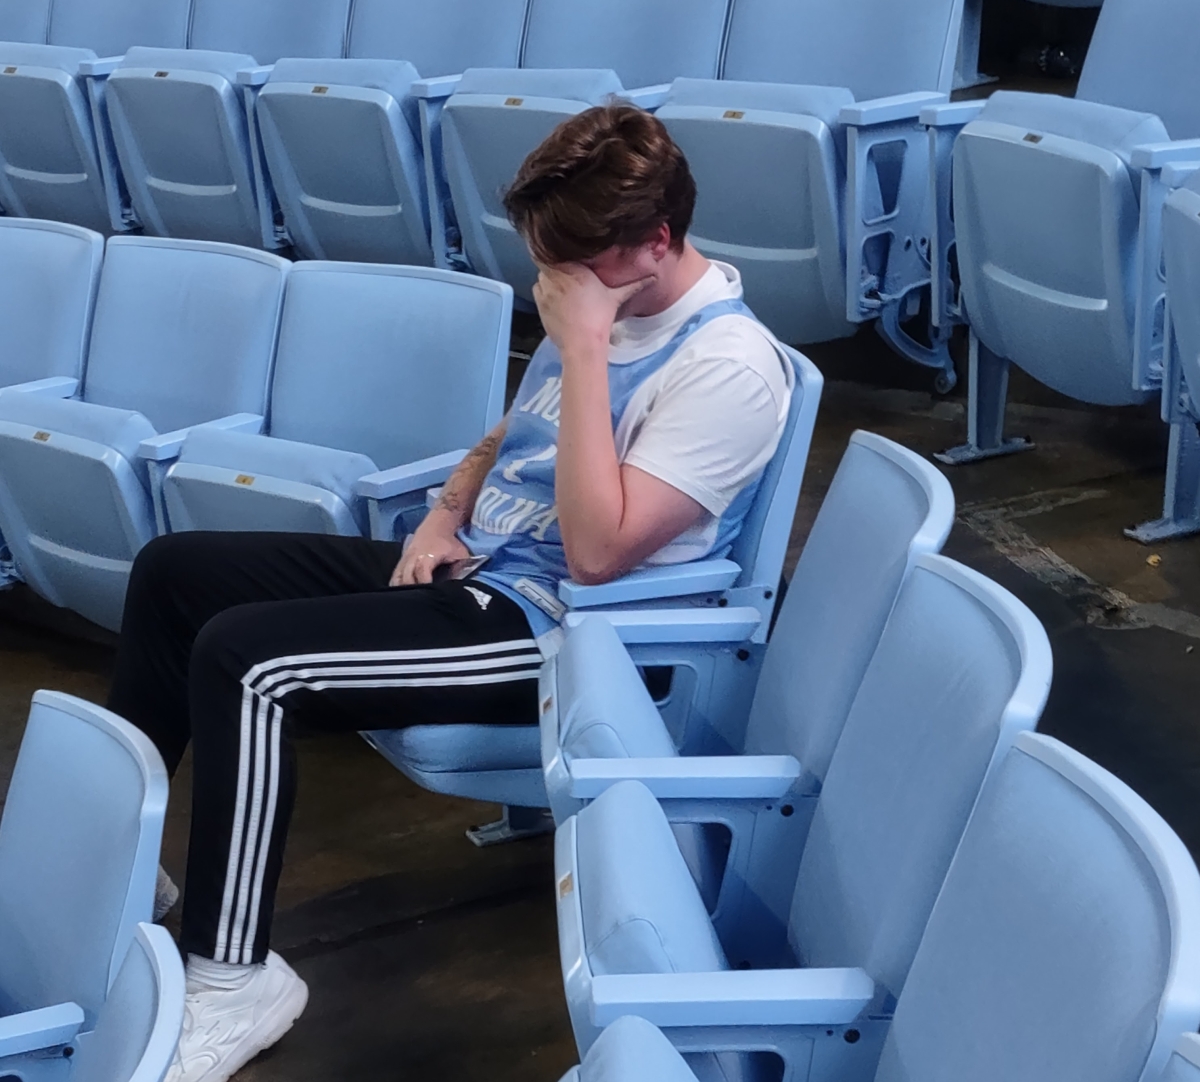 Excitement turns to sadness at Smith Center